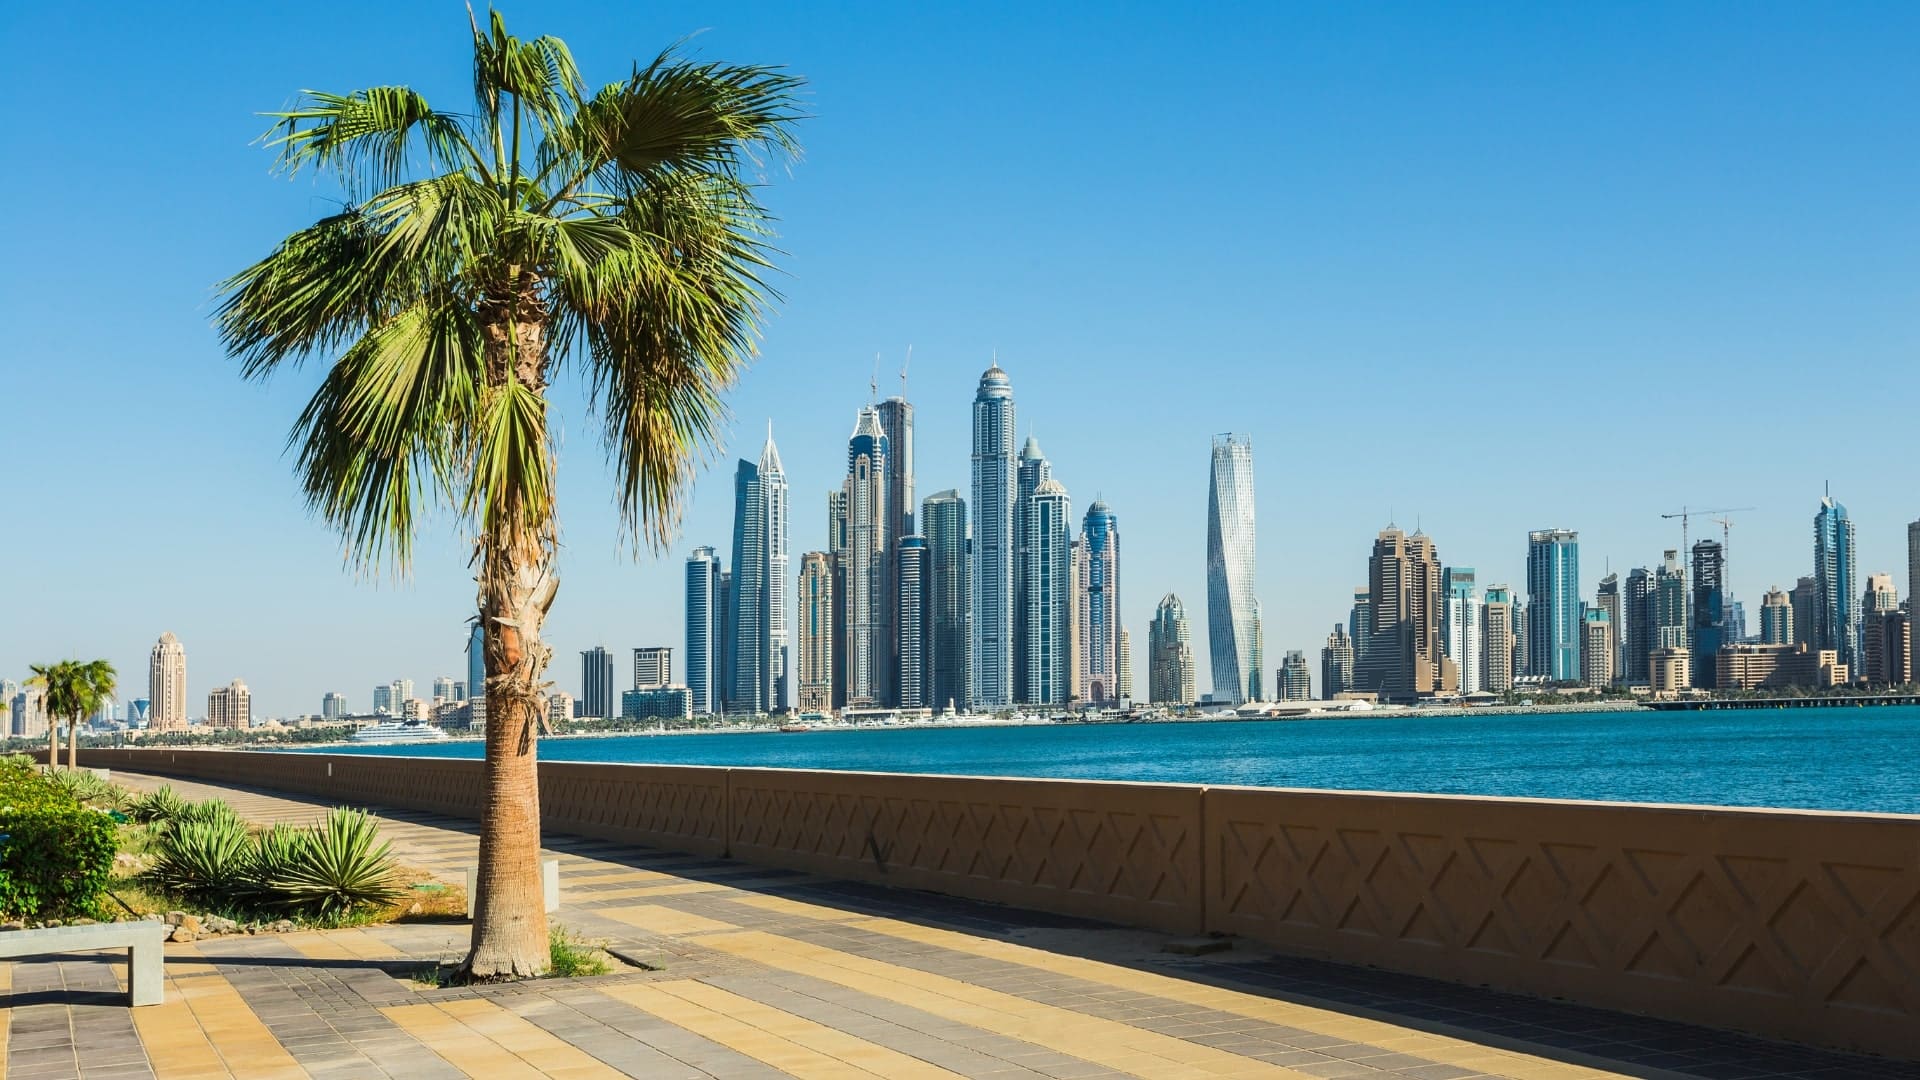 which free zone is best in uae